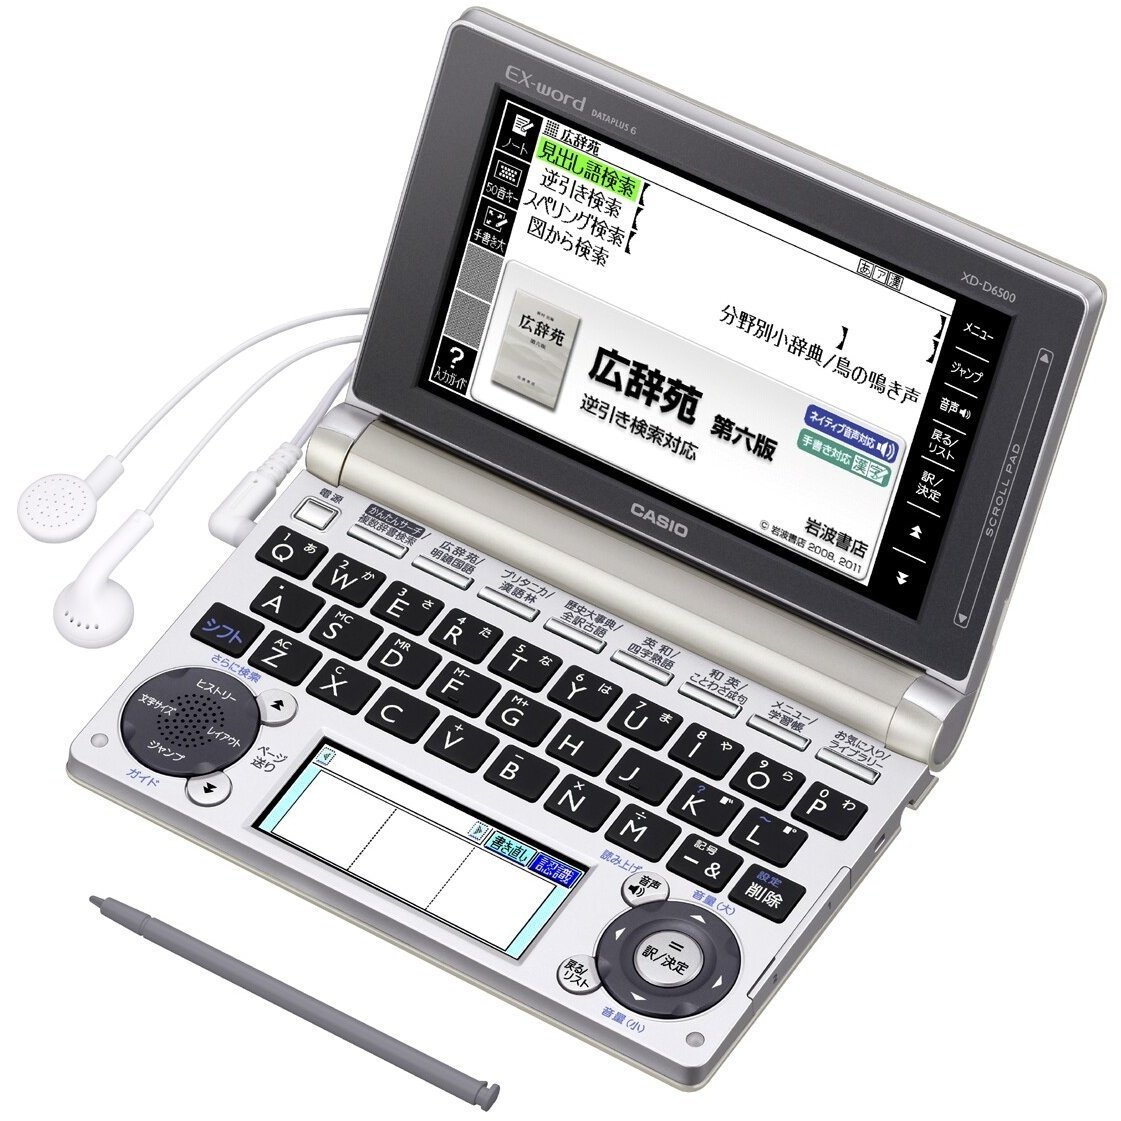 CASIO EX-word XD-D6500GD Japanese English Electronic Dictionary ...